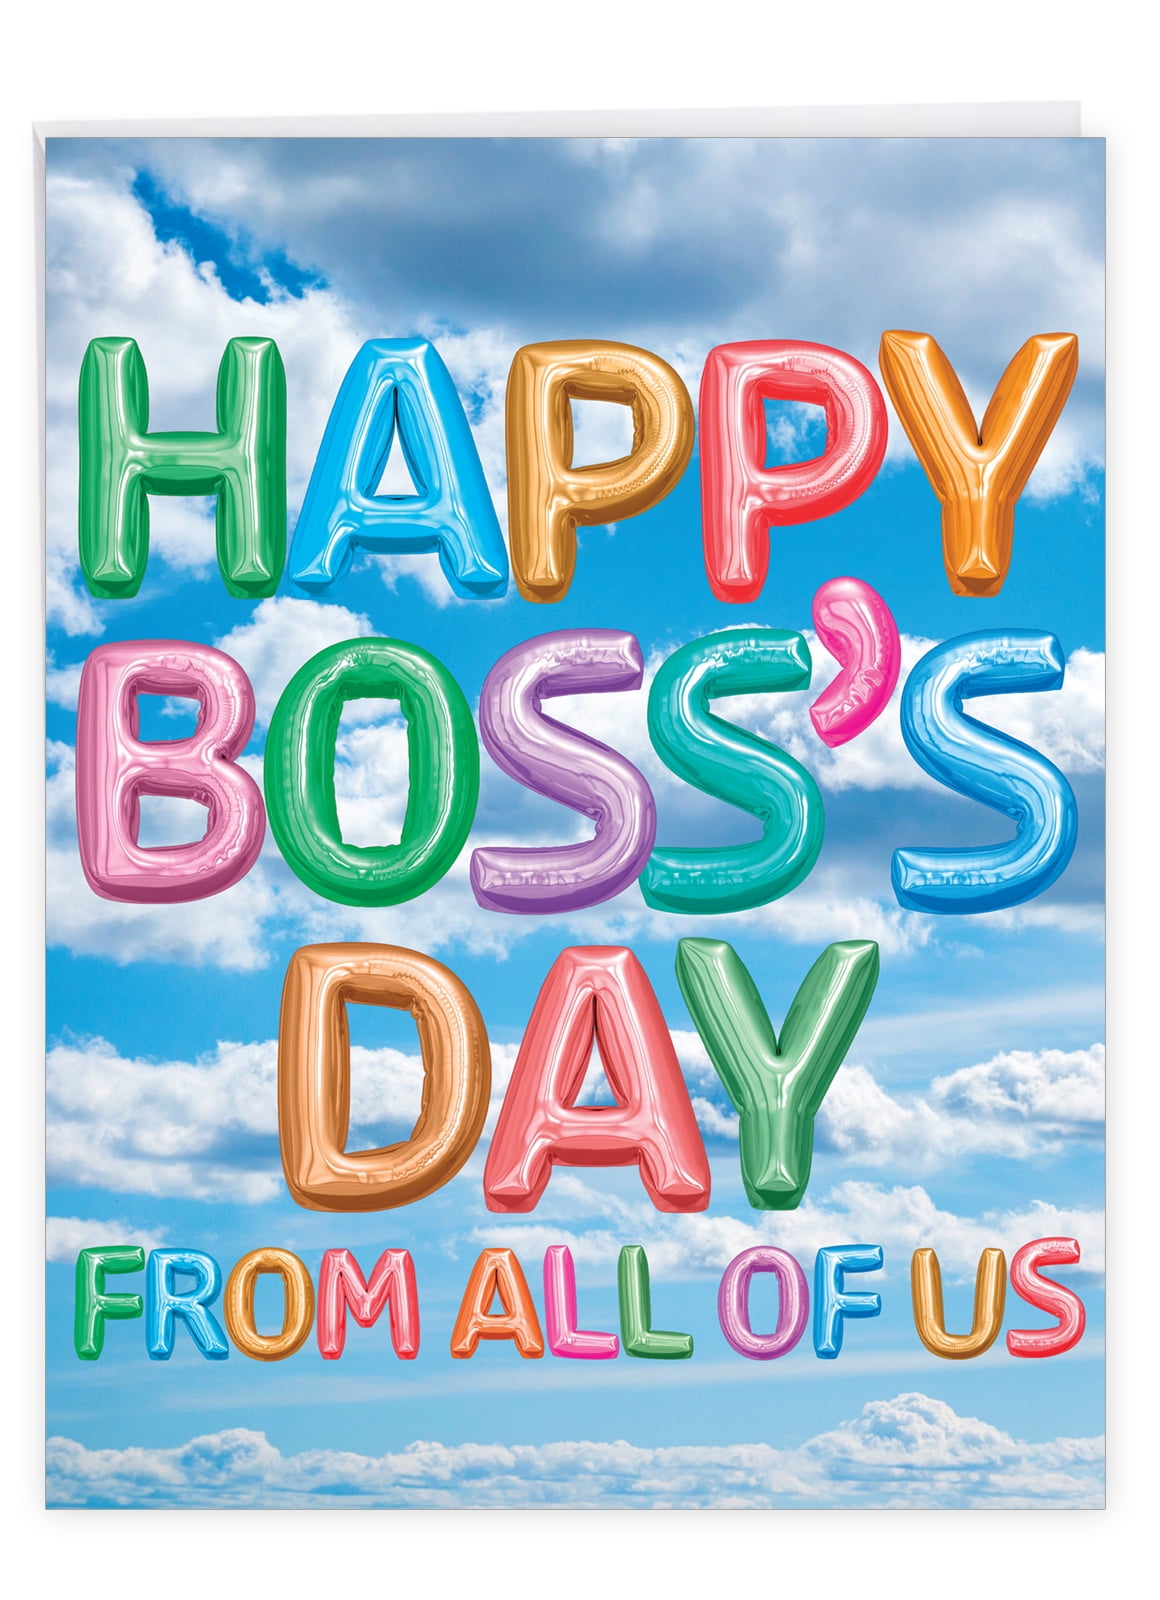 big-happy-boss-s-day-card-8-5-x-11-inch-group-greeting-card-for